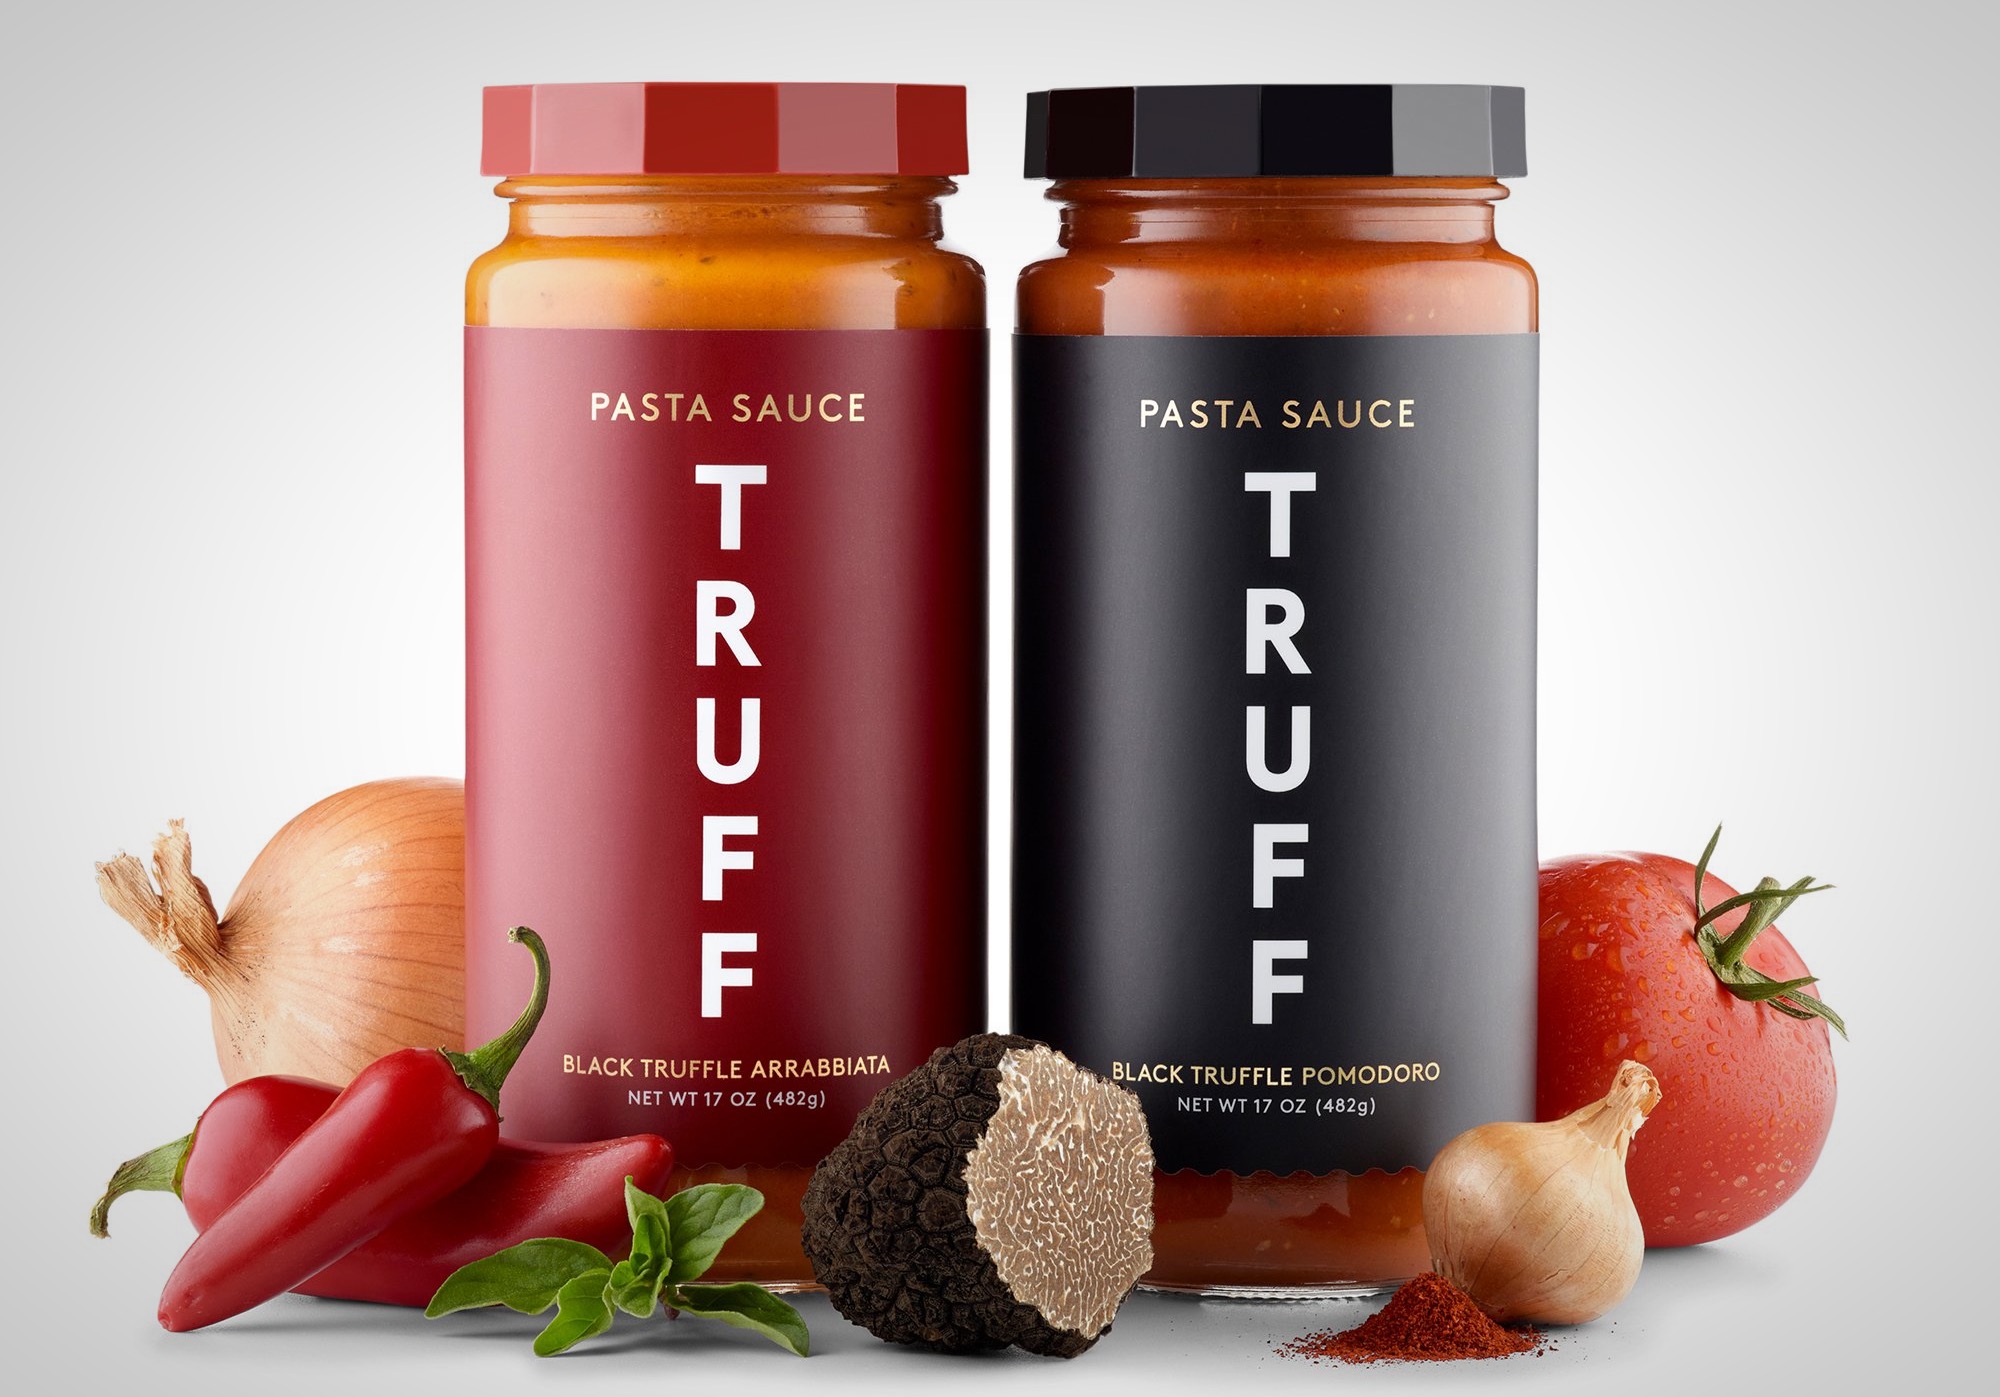 TRUFF's New Black Truffle-Infused Pasta Sauces Just Made Me A Customer